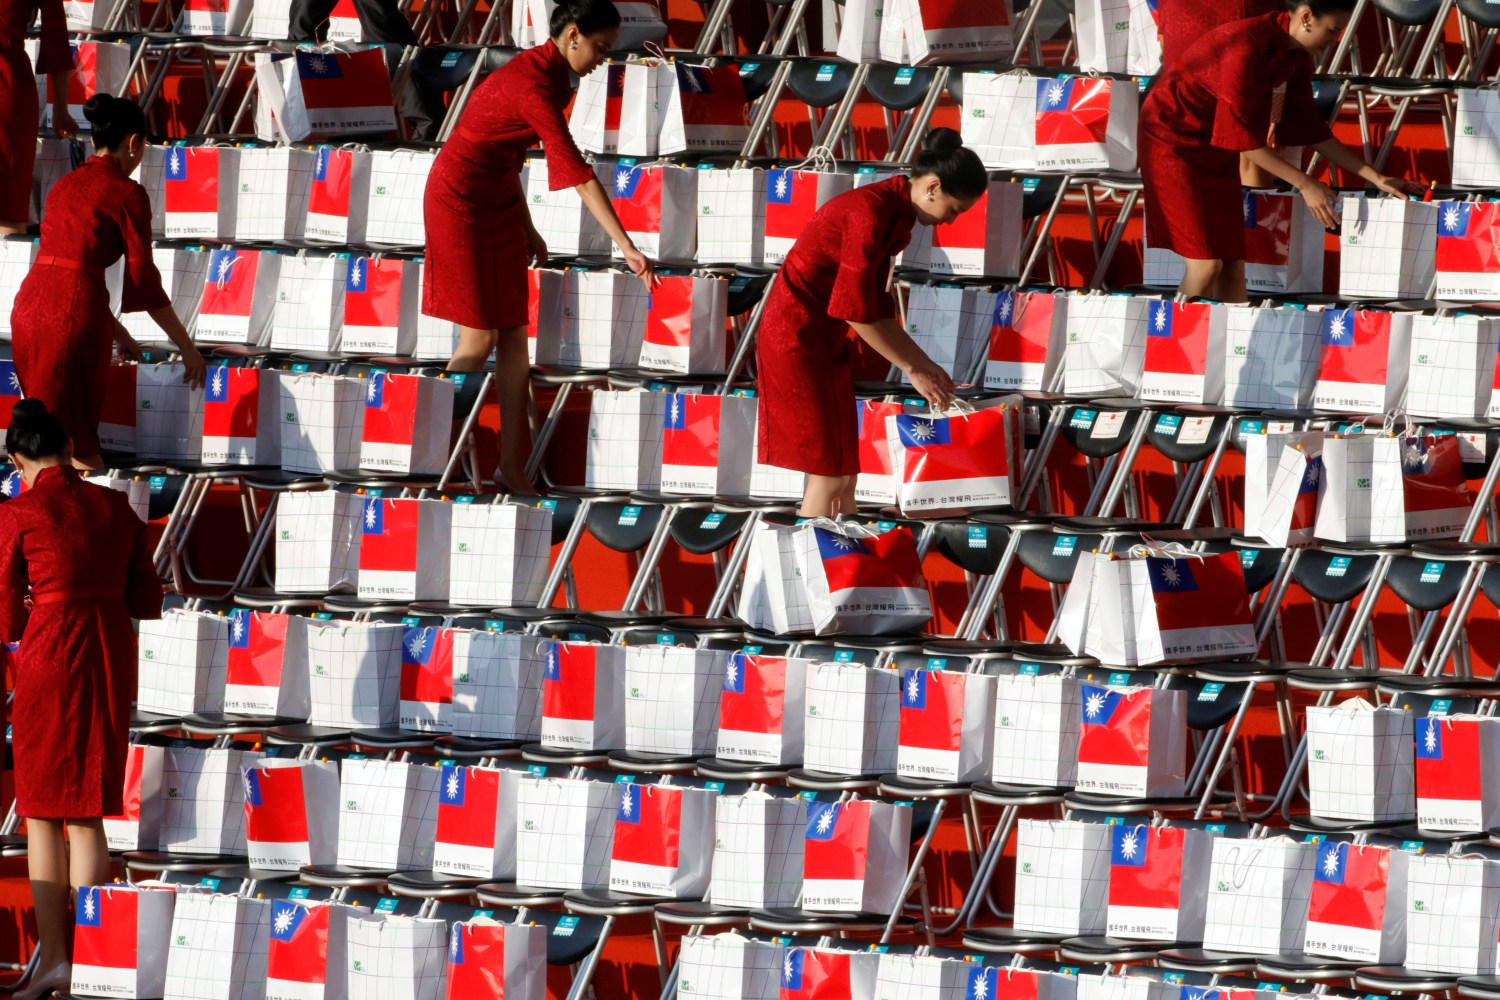 Staff members place boxes in chairs before the National Day celebrations in front of the Presidential Palace in Taipei, Taiwan, October 10, 2019. REUTERS/Eason Lam - RC1A7C3144B0